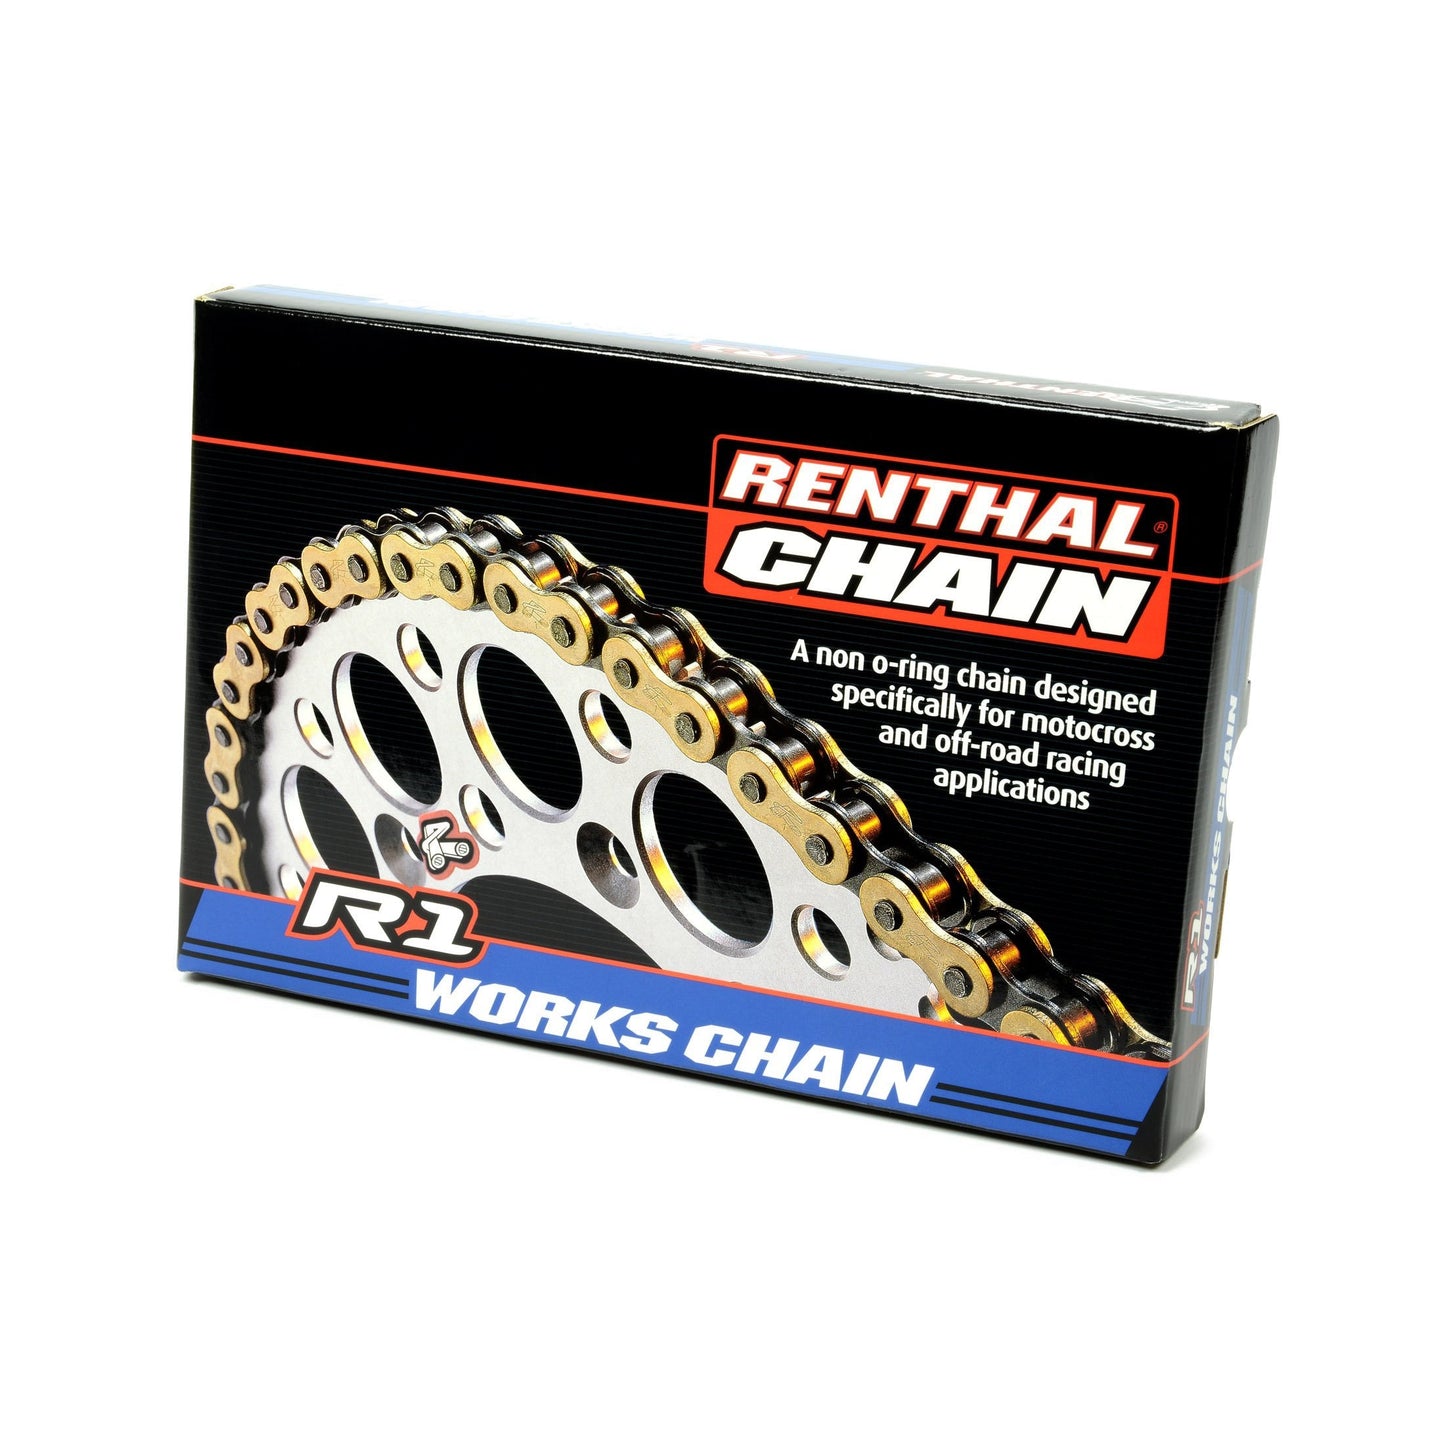 Renthal R1 Works Chain - Renthal